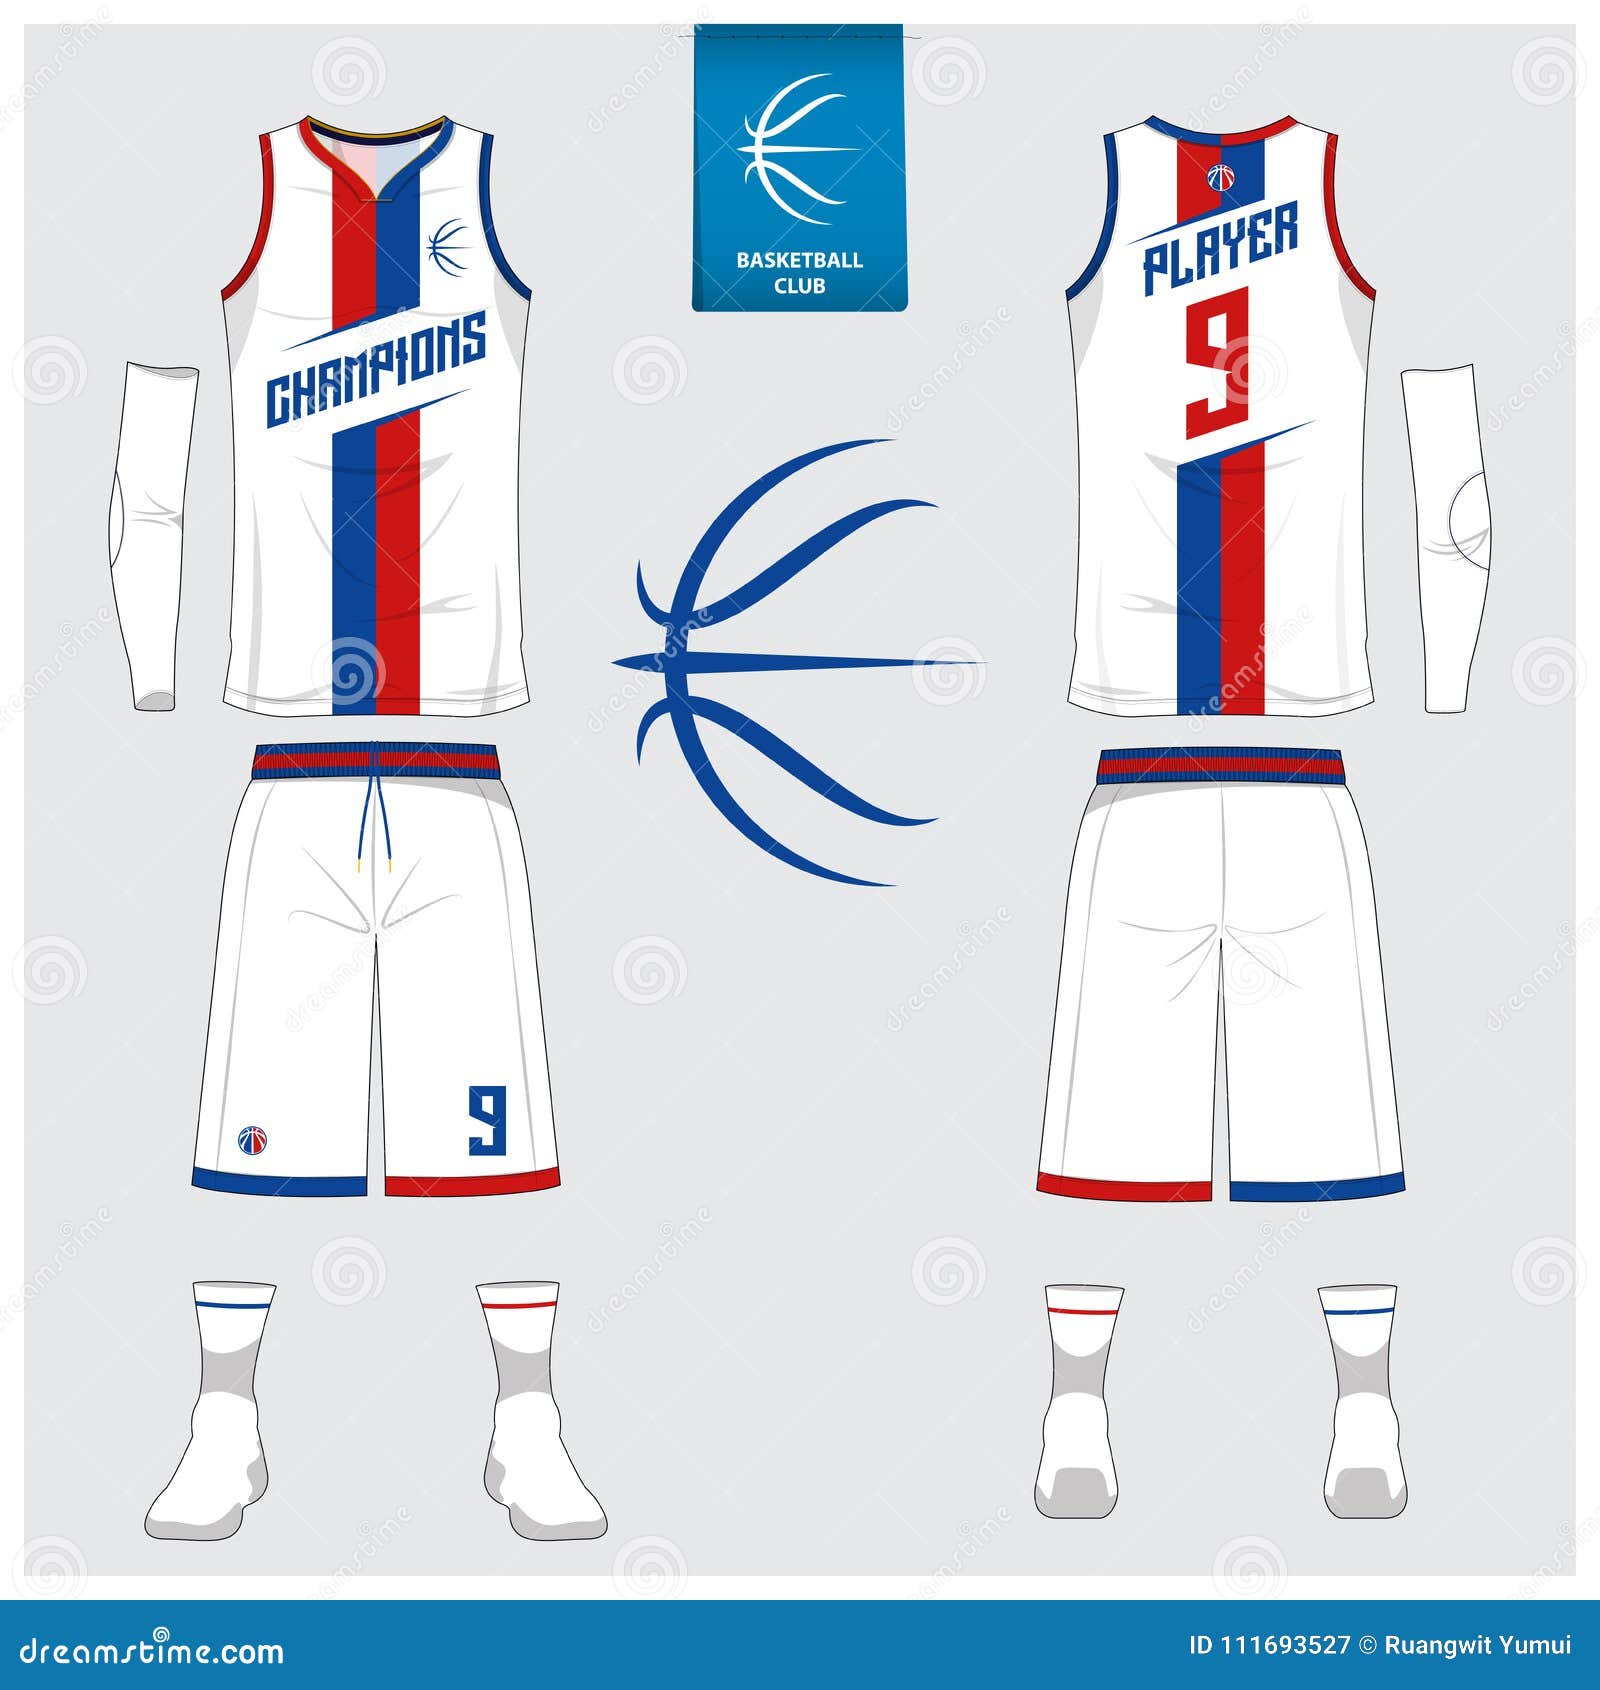 Basketball Uniform Or Jersey, Shorts, Socks Template For Basketball Club.  Front And Back View Sport Uniform. Tank Top T-shirt Mock Up With Basketball  Flat Logo Design On Label. Vector Illustration. Royalty Free